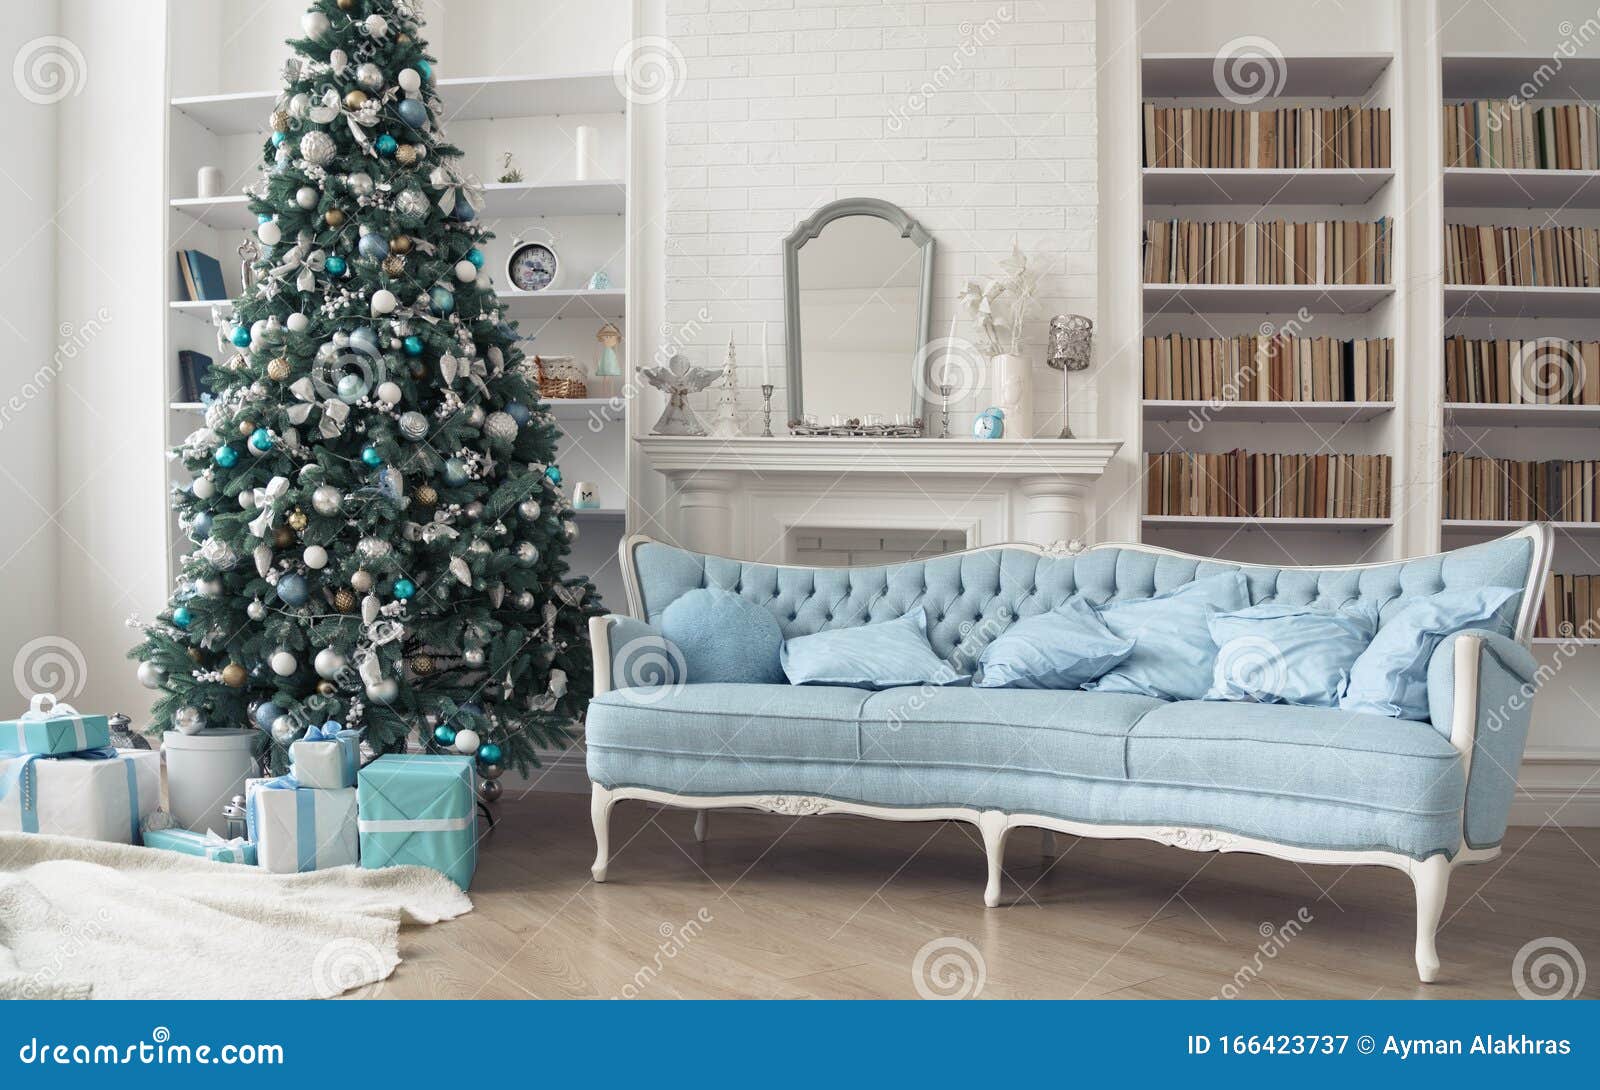 Classic French Blue Sofa And Decorated Christmas Tree With Gift Boxes Beneath In Living Room